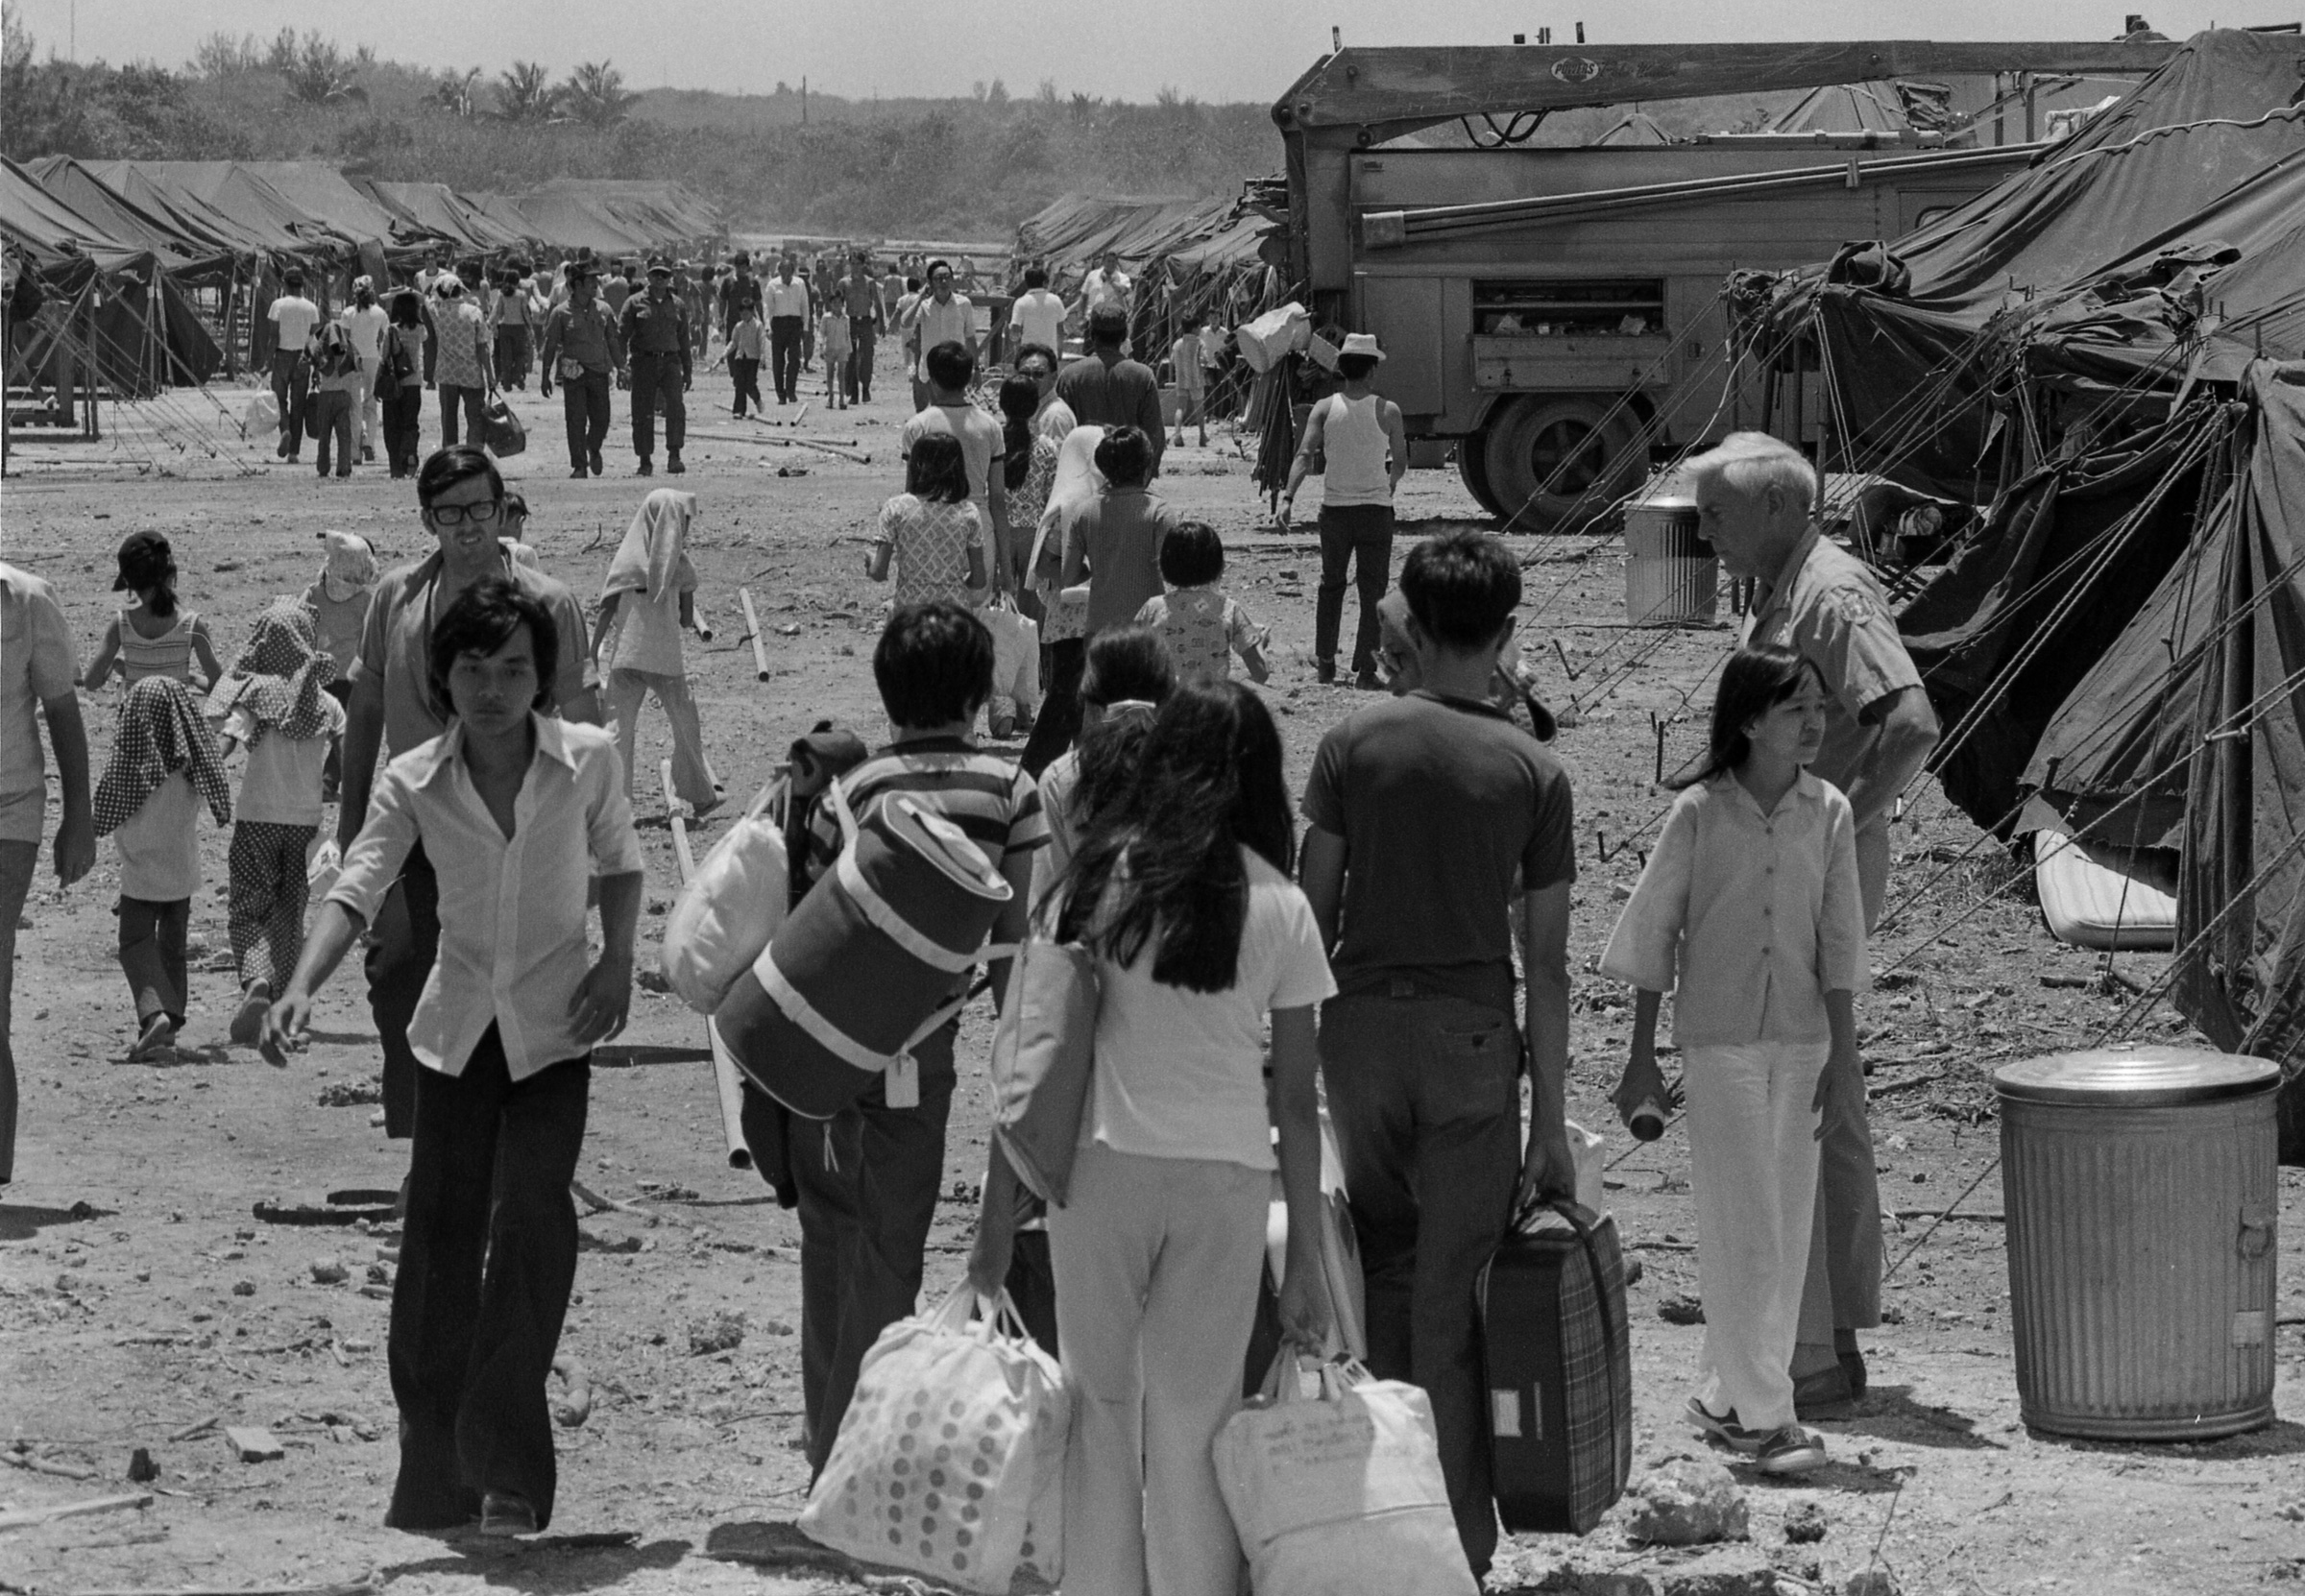 More than 3,000 refugees from South Vietnam enter the camp at Crote Point in Guam Naval Base after they were shifted from Clark Air Base in the Philippines, April 26, 1975. (Bettmann Archive/Getty Images)